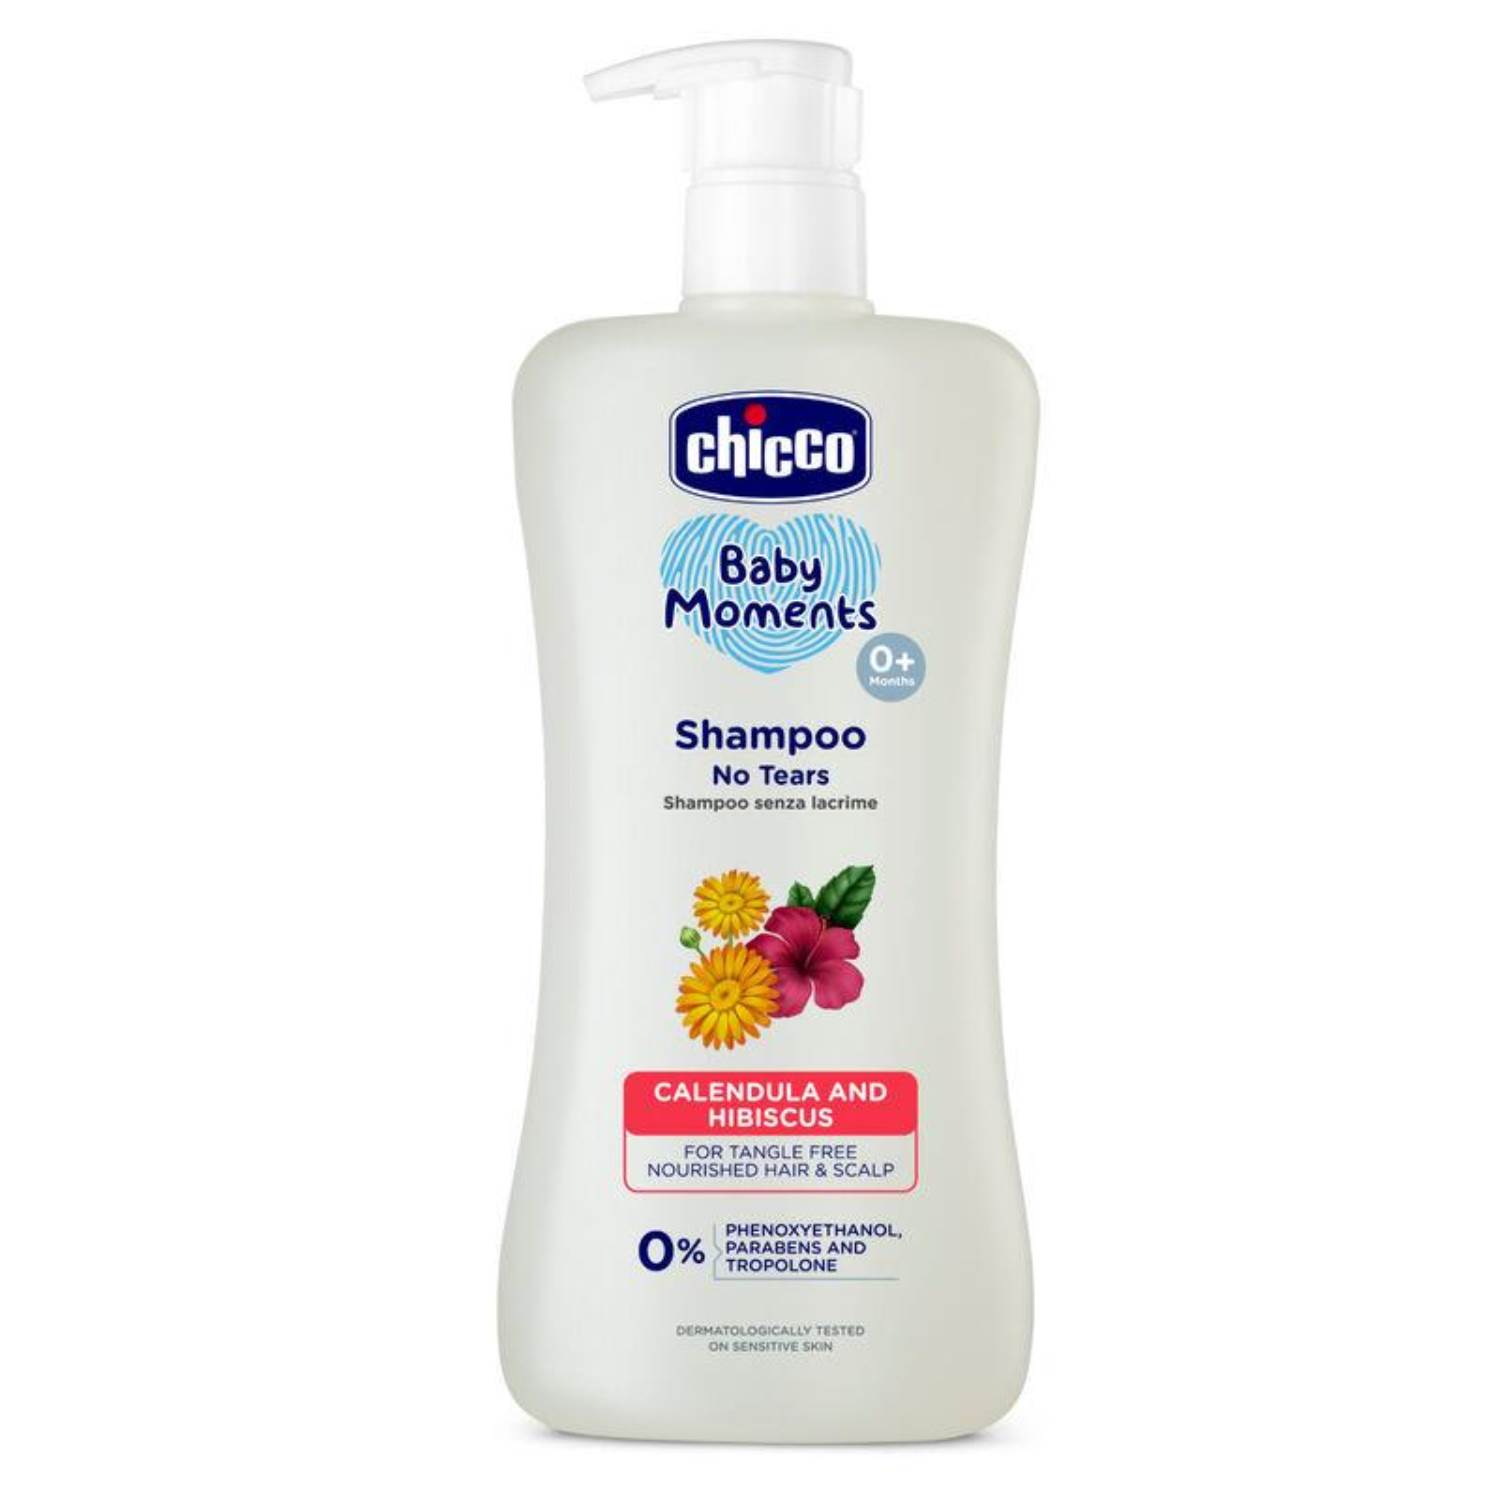 Chicco Baby Moments Shampoo for Tear-Free Bath times, New Advanced formula  with Natural Ingredients, Suitable for baby's :: SMILE BABY